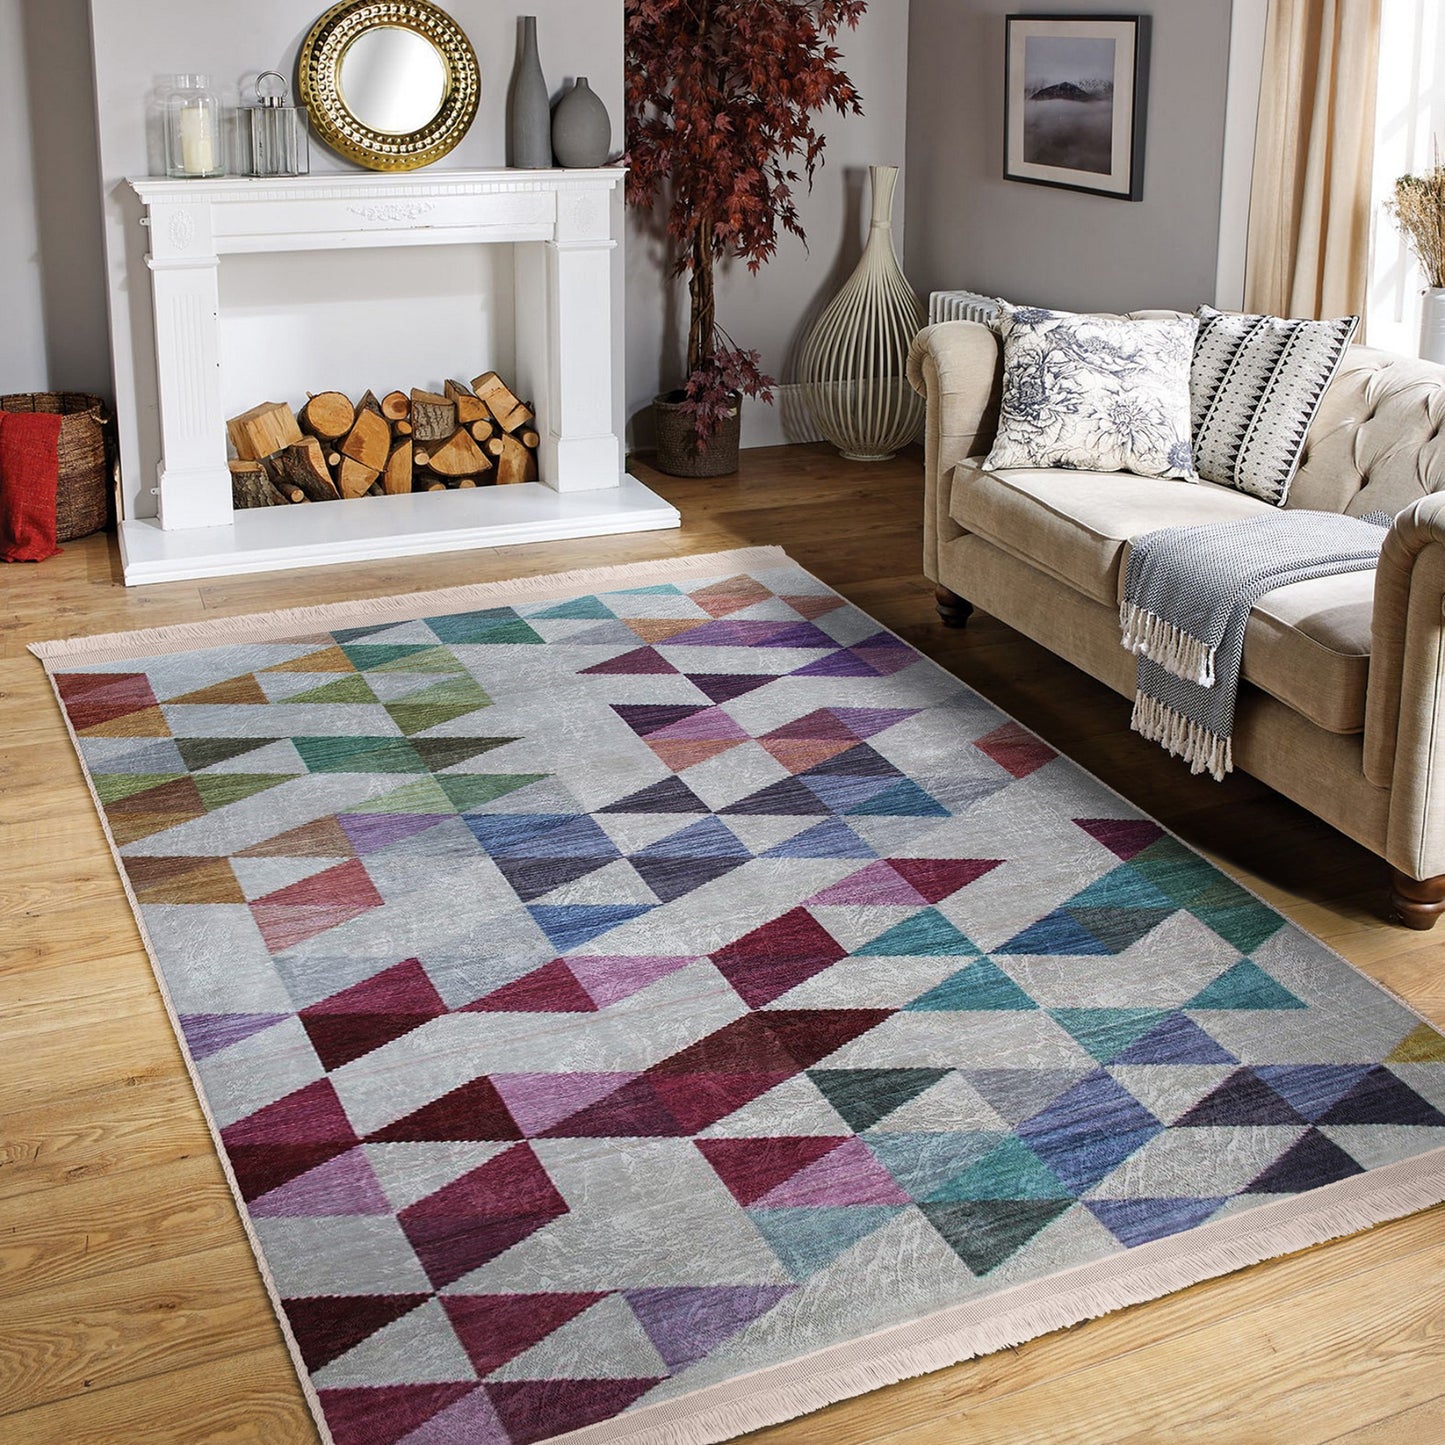 Elegant Rug with Tranquil Geometric Patterns for Home Decor